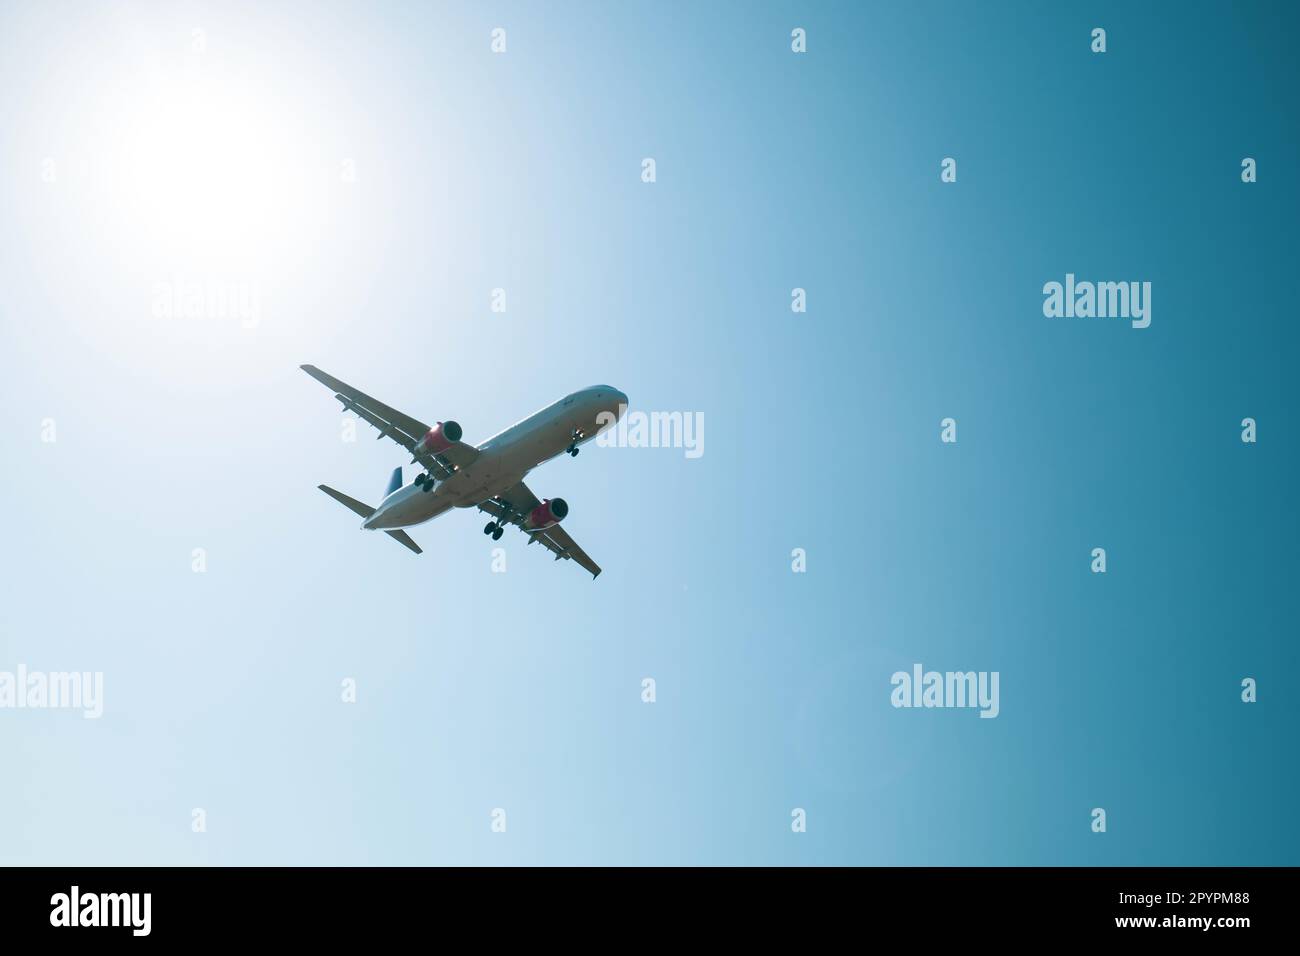 Landing of a commercial aircraft while aproaching airport Stock Photo